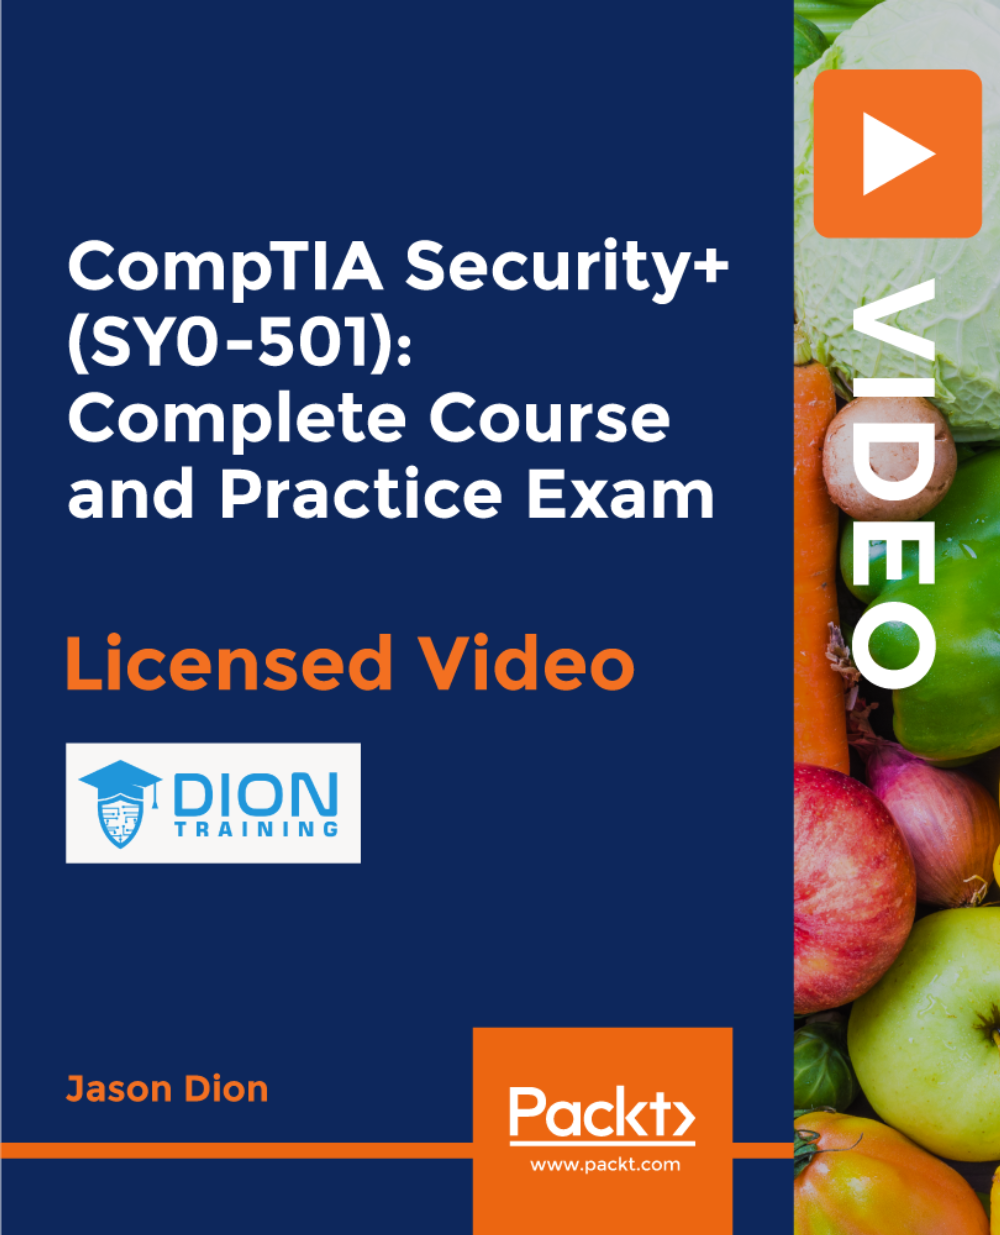 CompTIA Security+ (SY0-501): Complete Course and Practice Exam